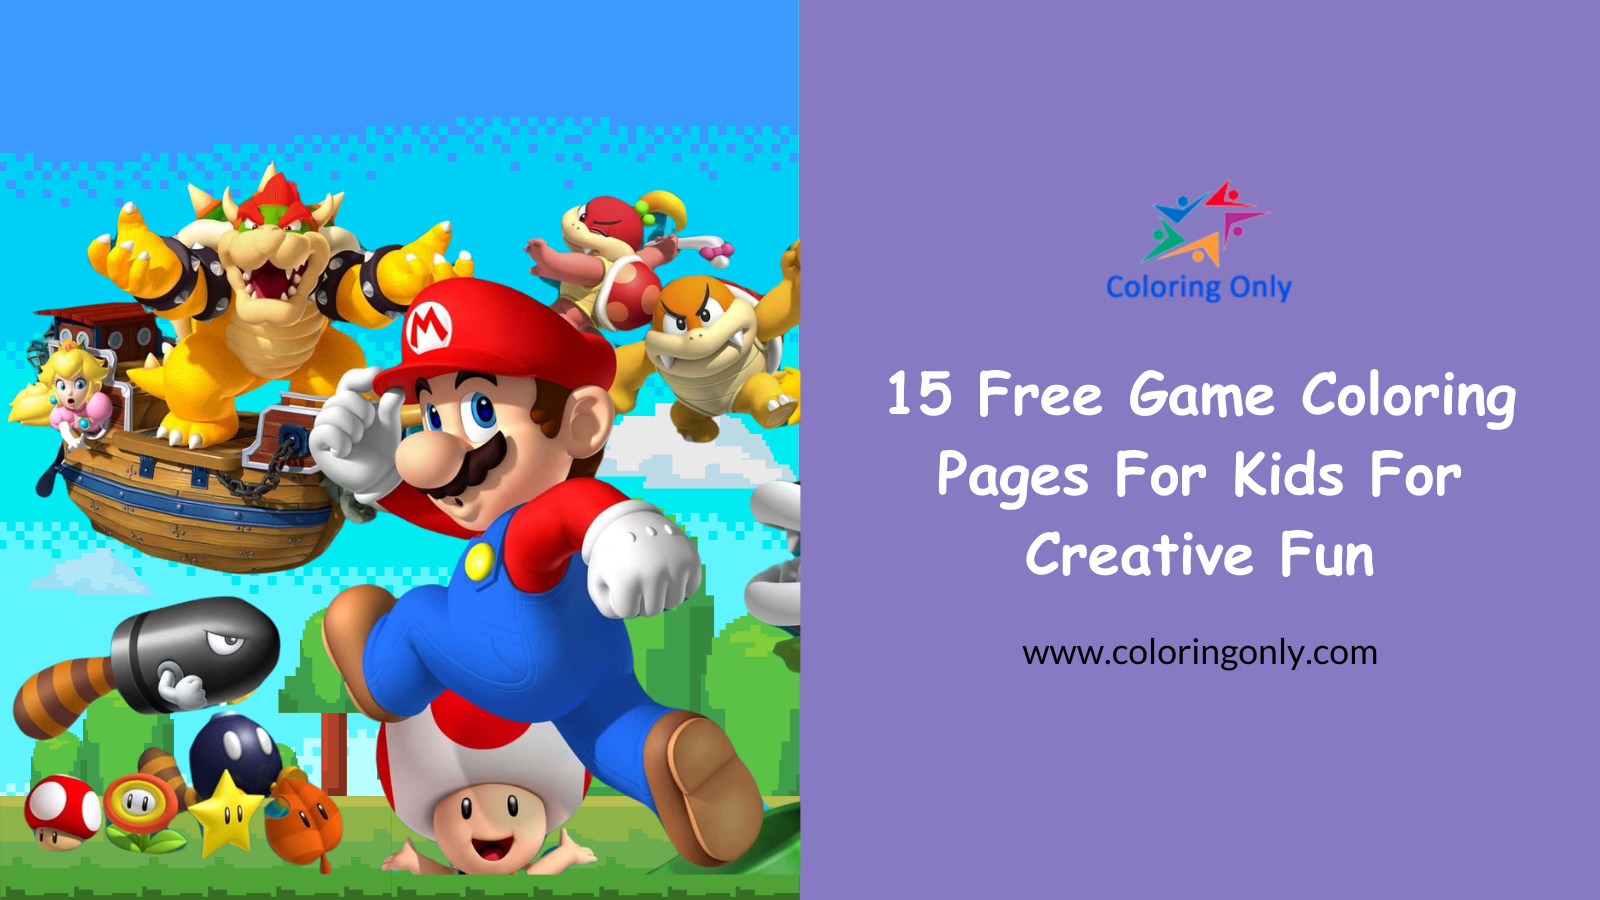 15 Free Game Coloring Pages For Kids For Creative Fun